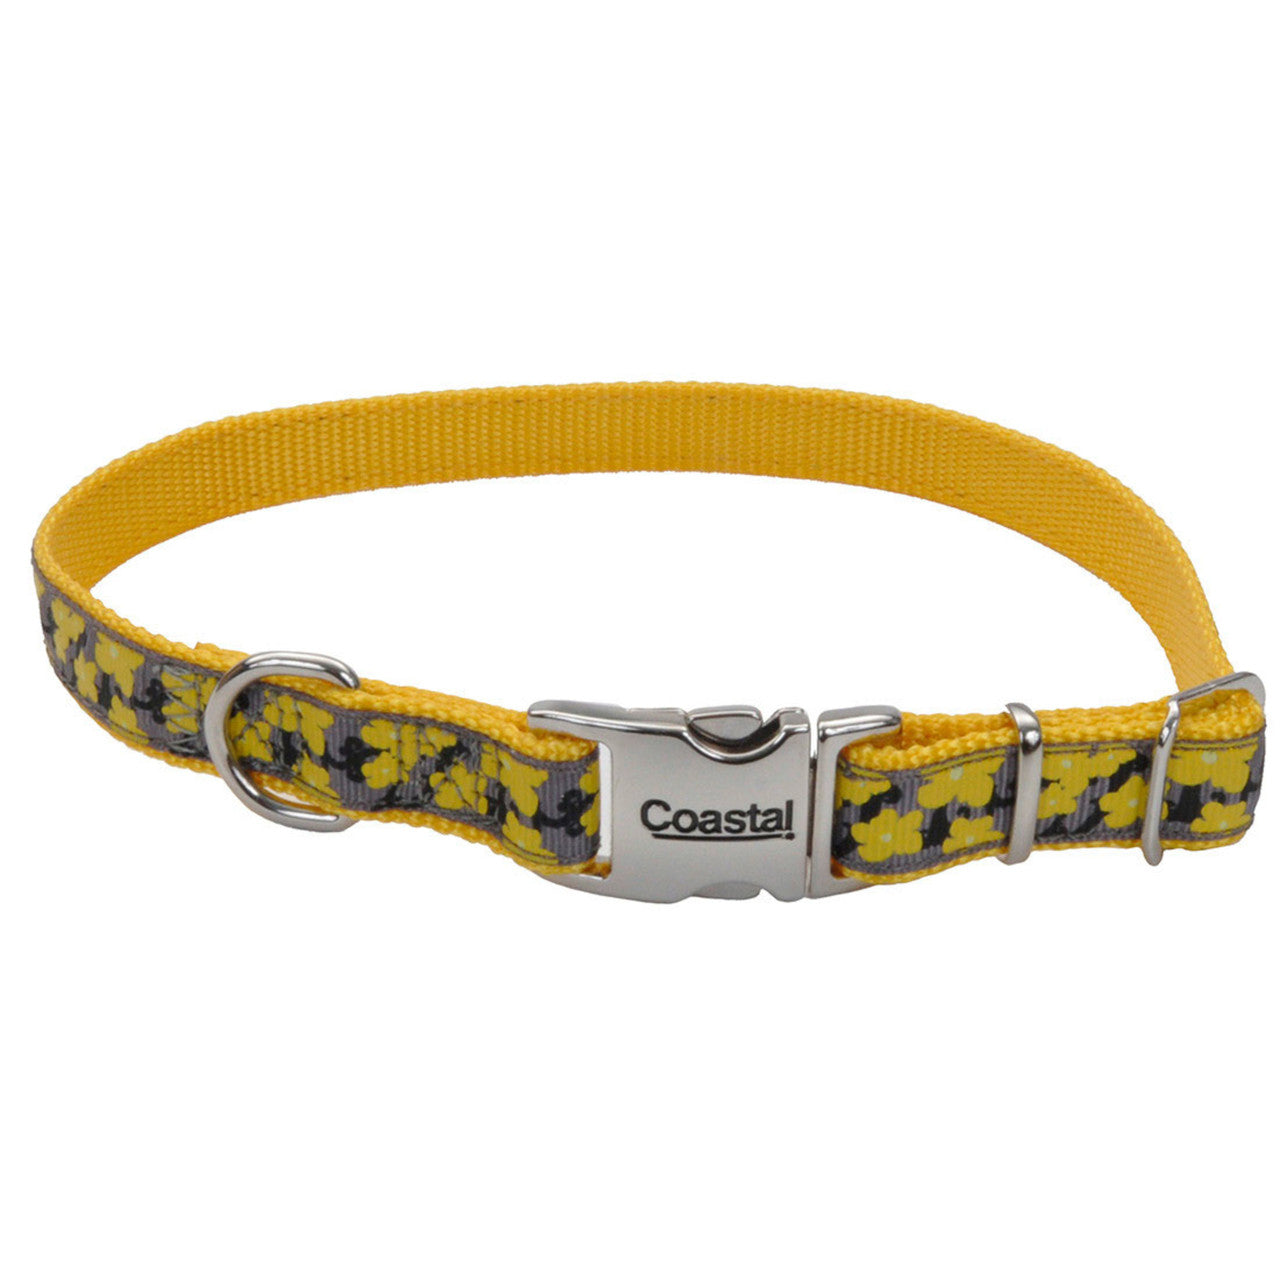 Ribbon Adjustable Nylon Dog Collar with Metal Buckle Yellow 5/8 in x 12-18 in